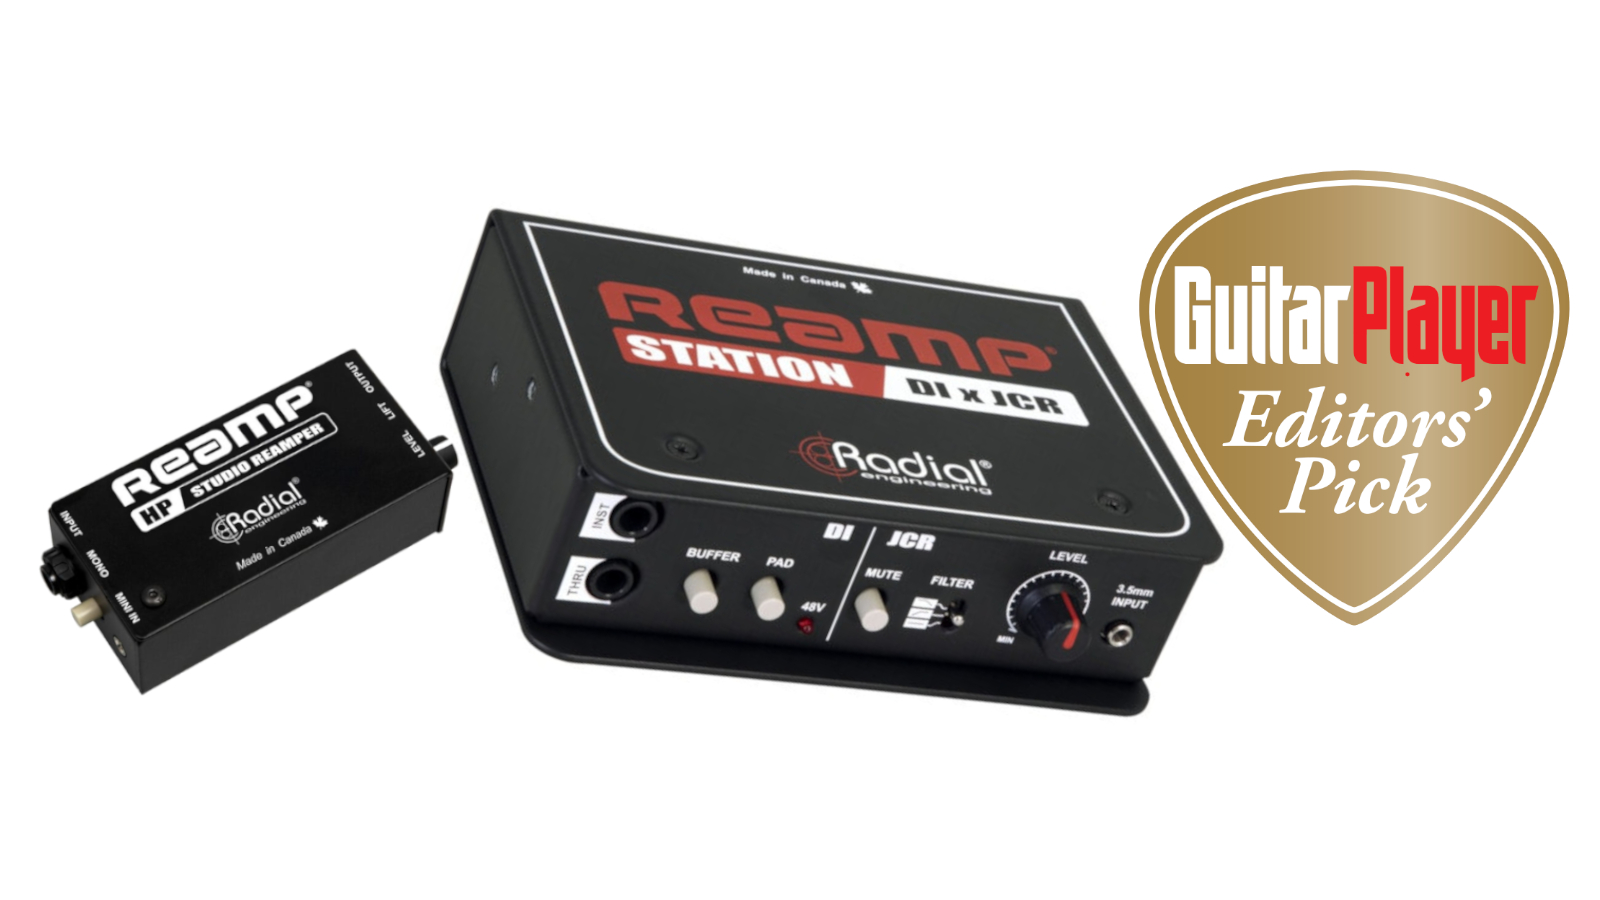 57%OFF!】 Radial Reamp Station